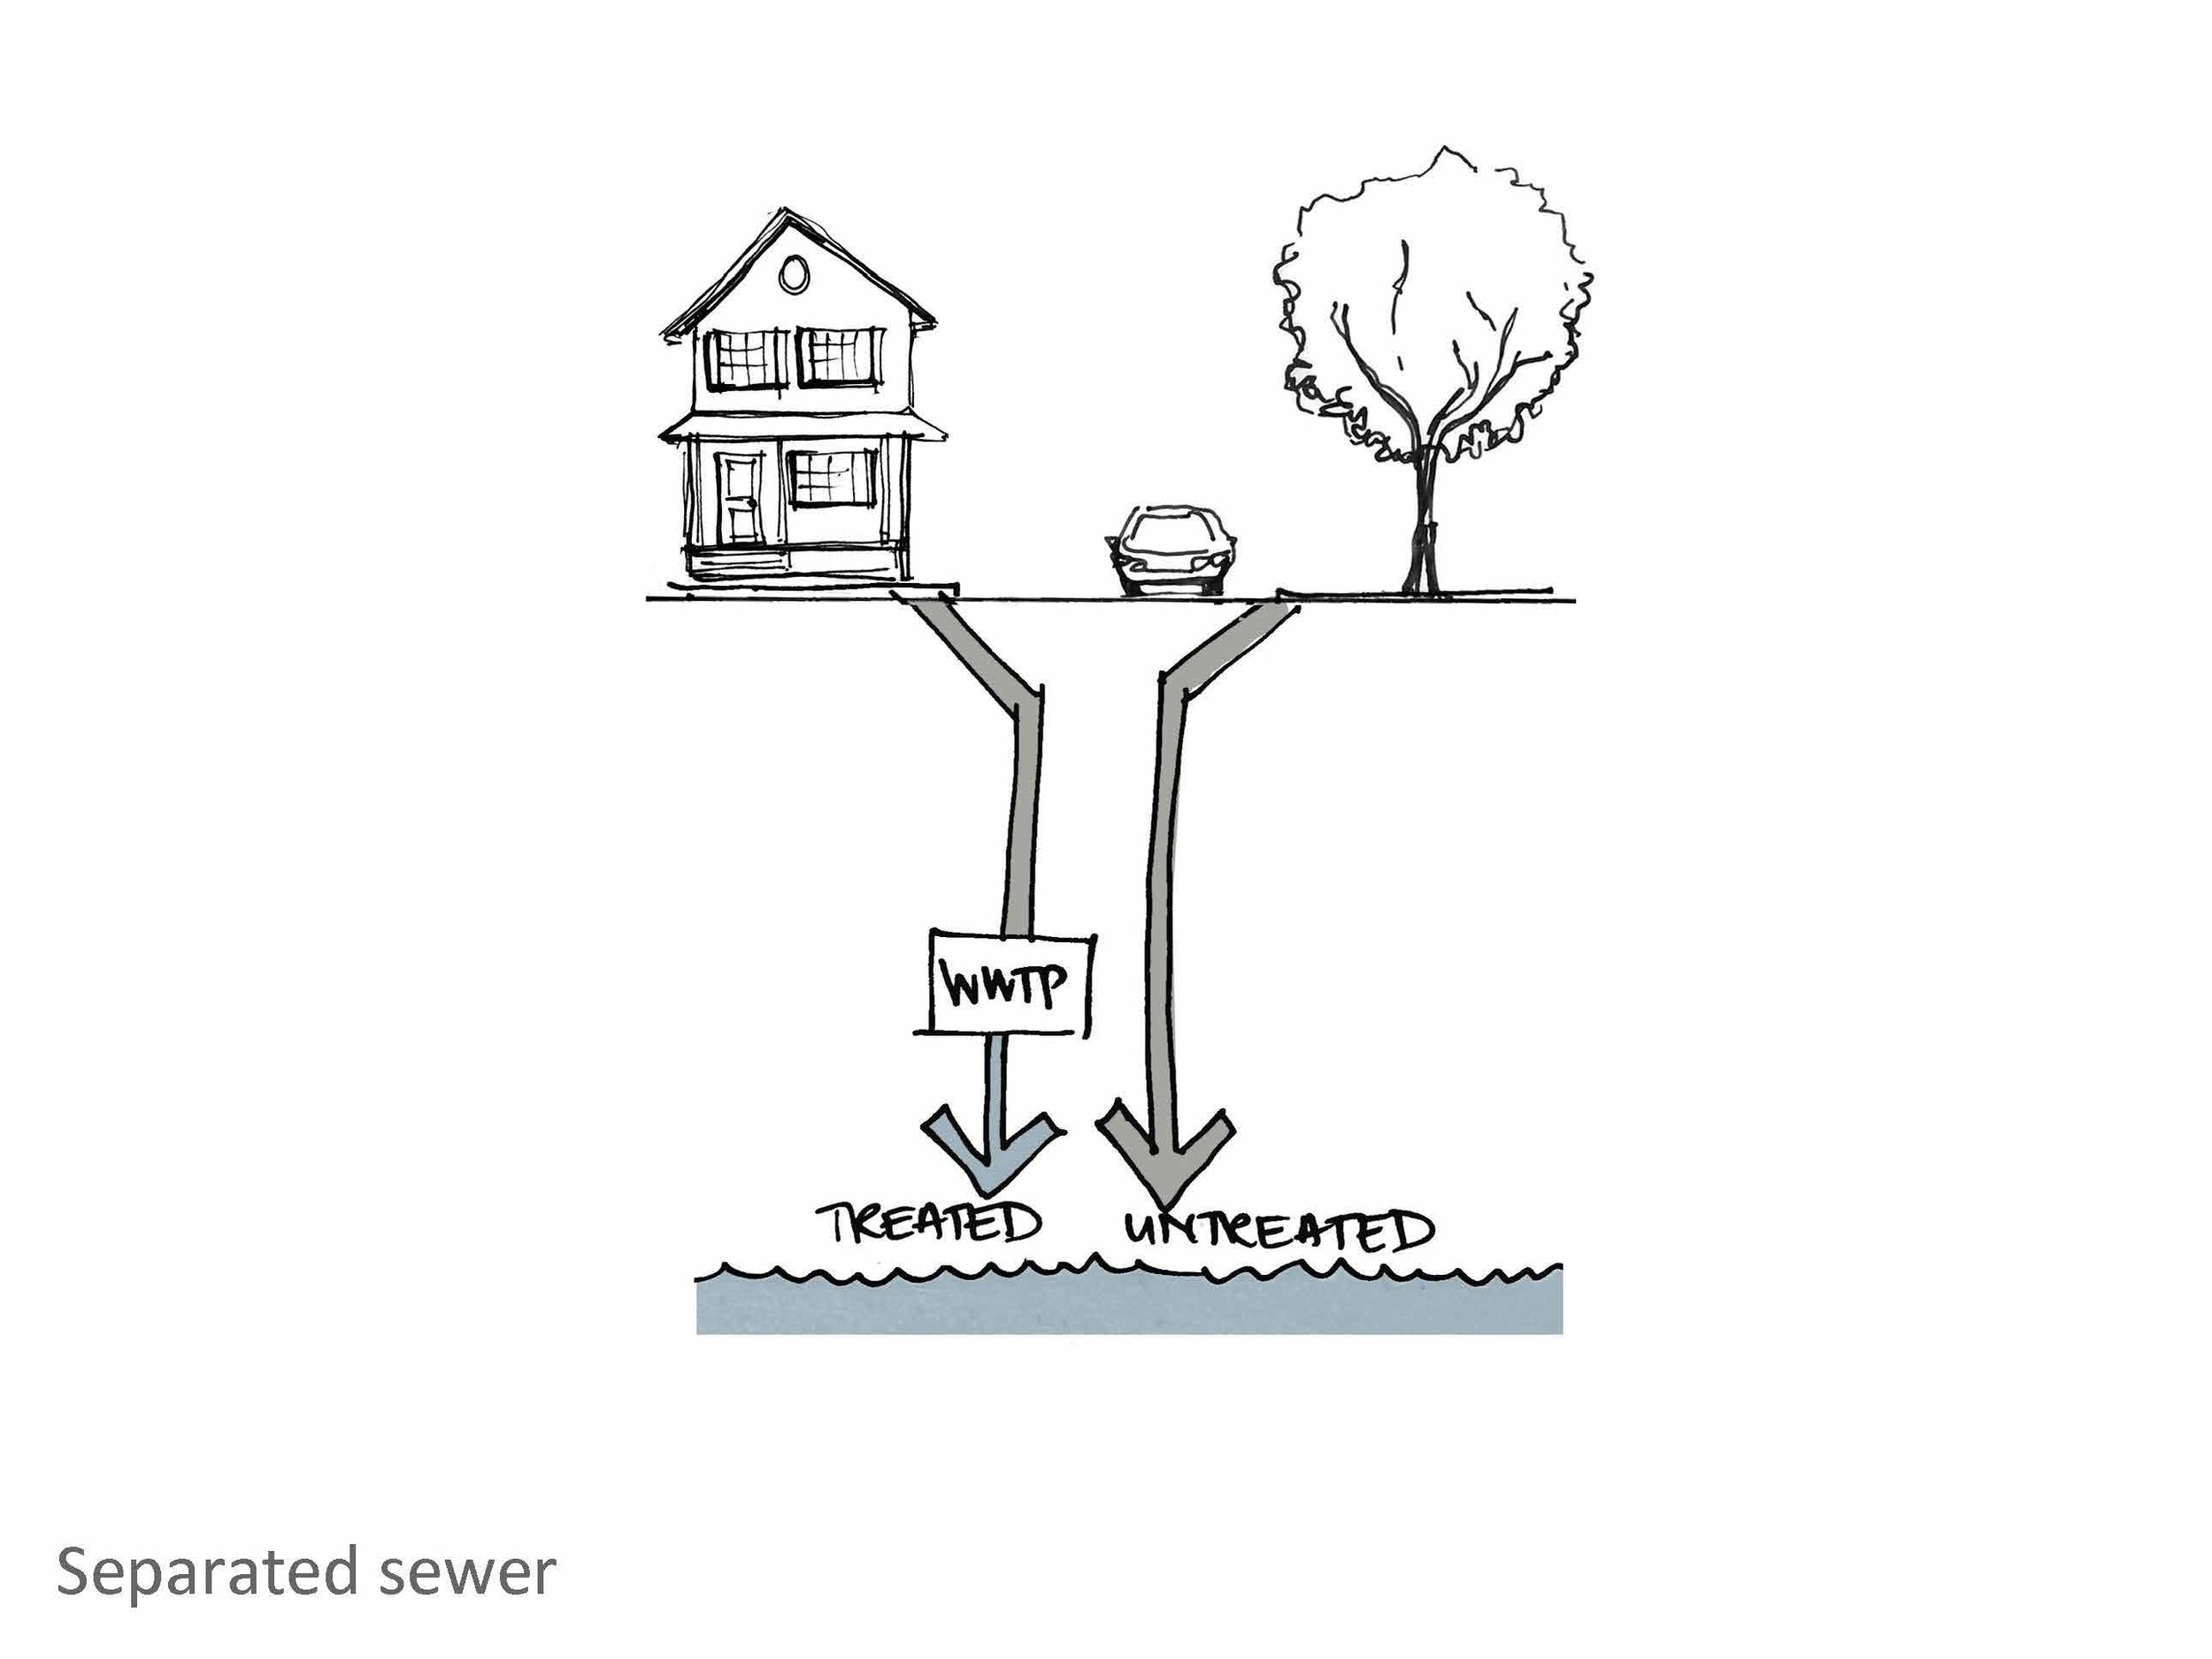 The problem with sewer separation